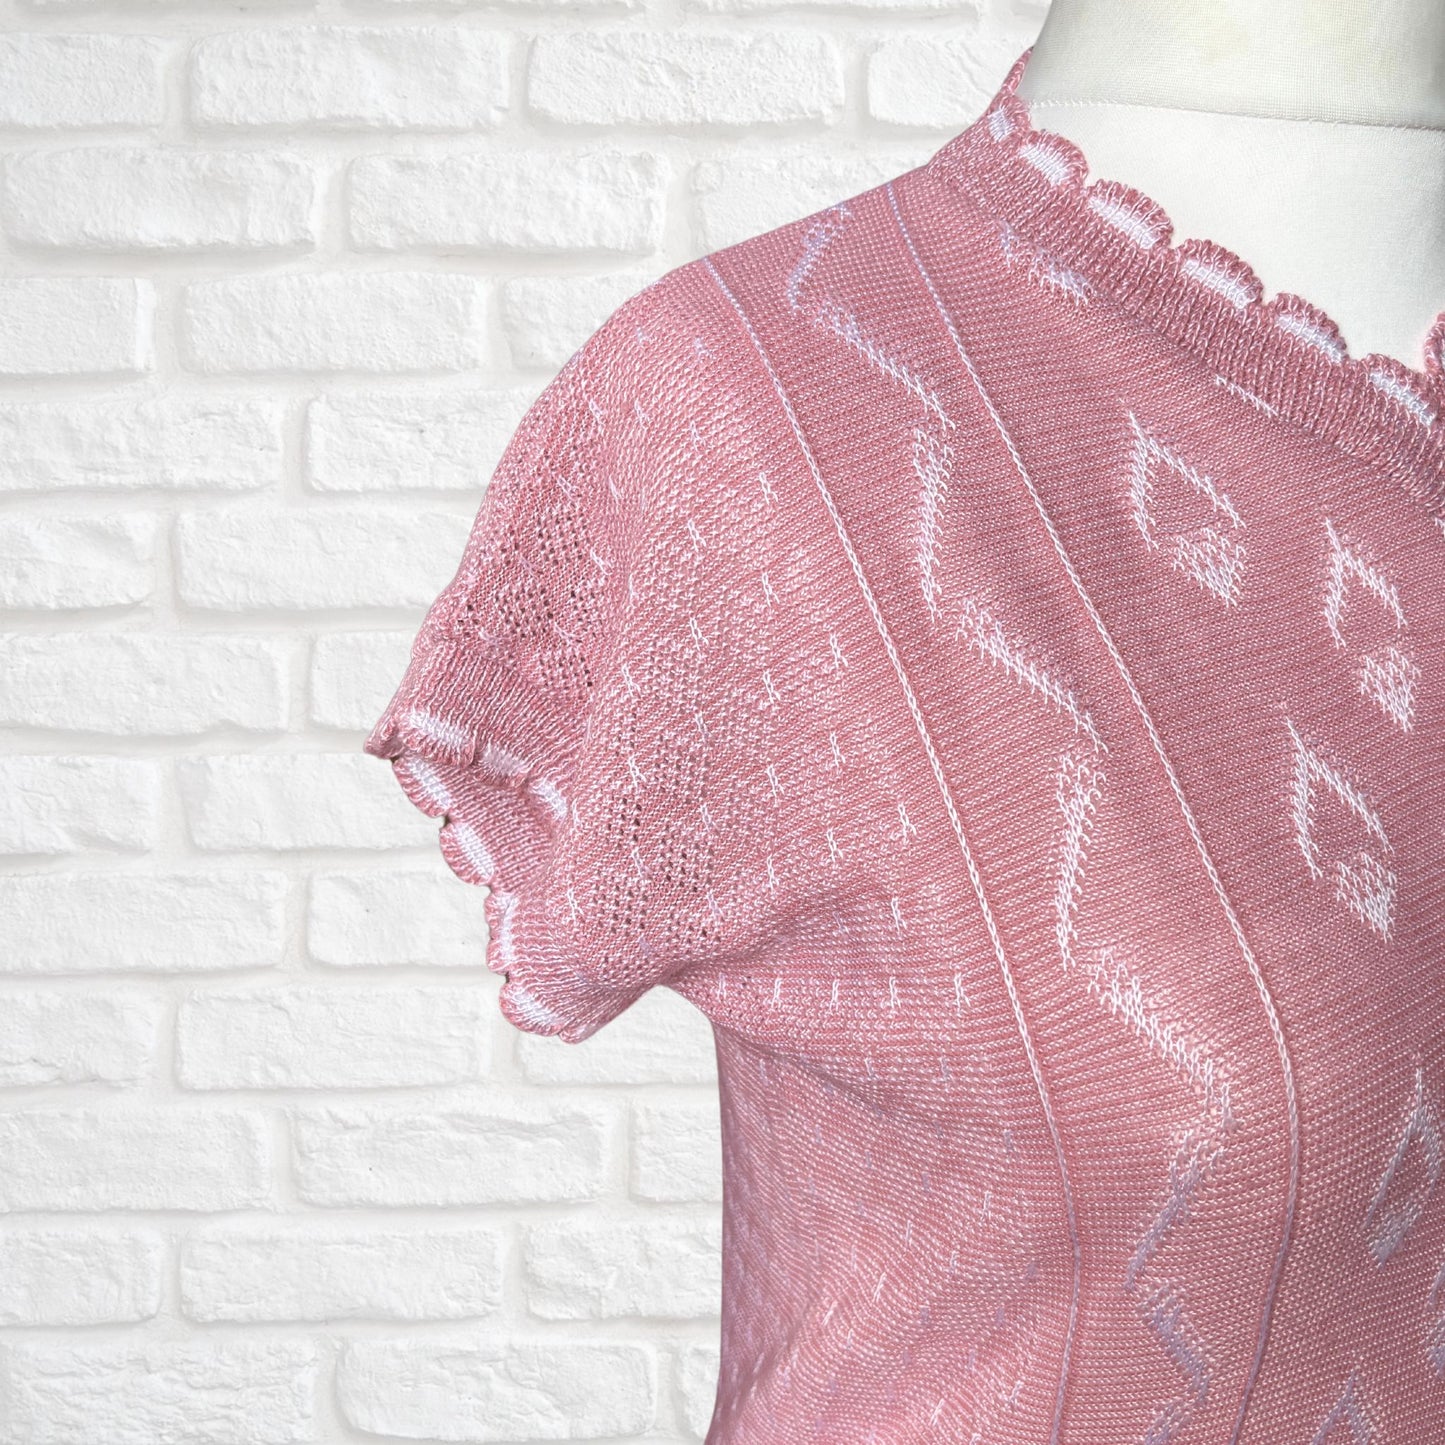 Vintage 80s Pink and White Sleeveless Top with Scalloped Trim - Lightweight and Stylish Approx UK size 12-16